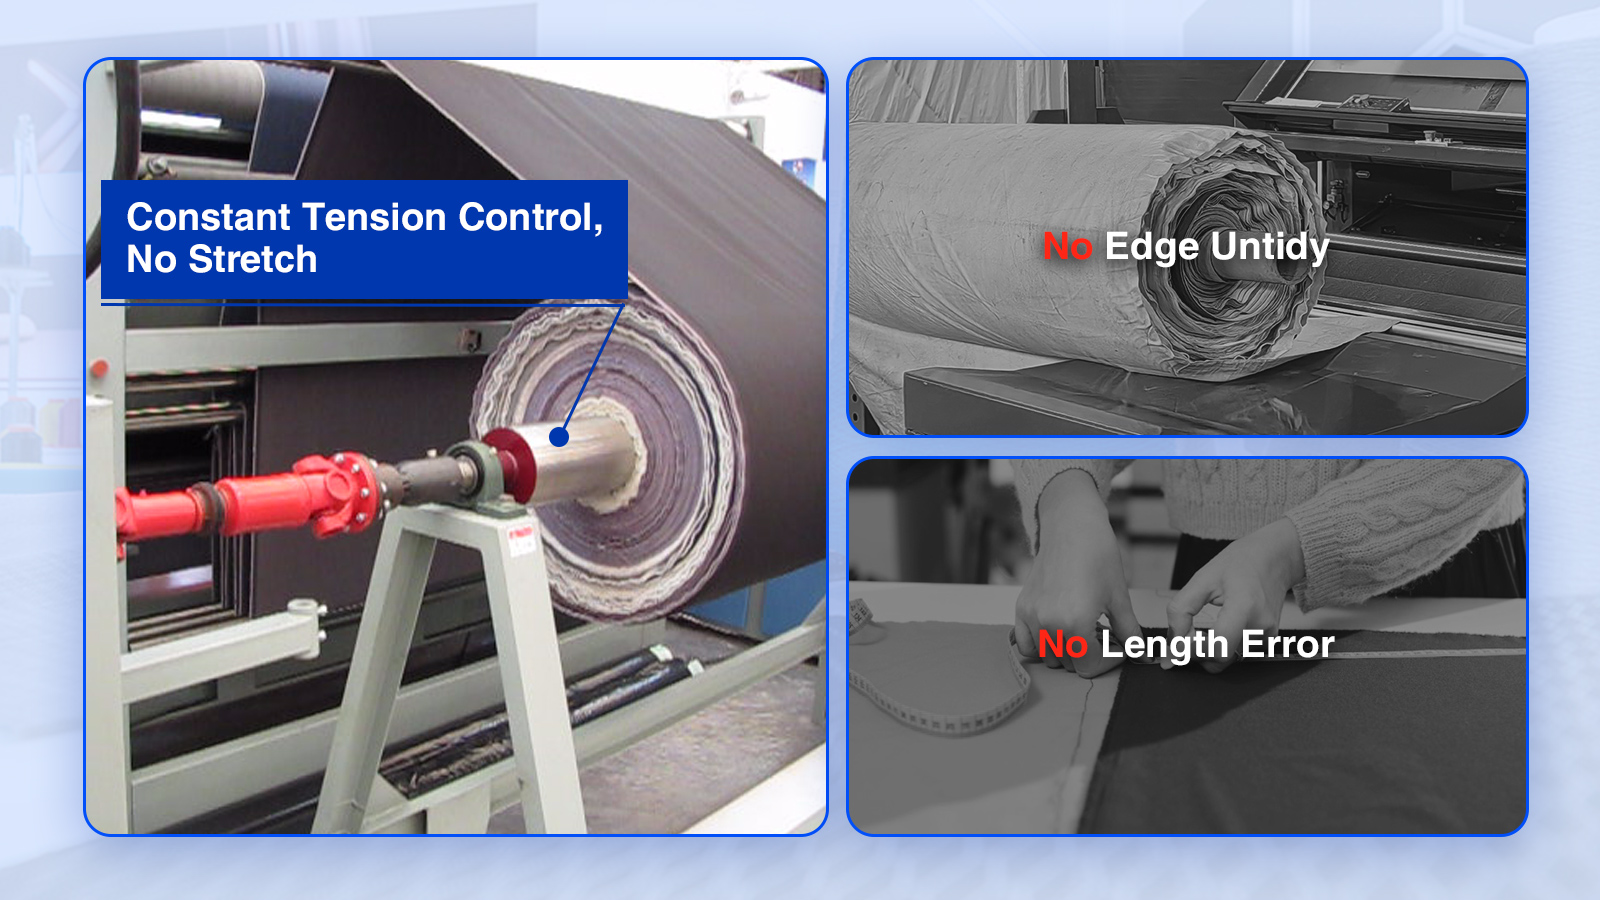 Keep Constant Tension in Inspection with No Damage, Realize High-standard Delivery